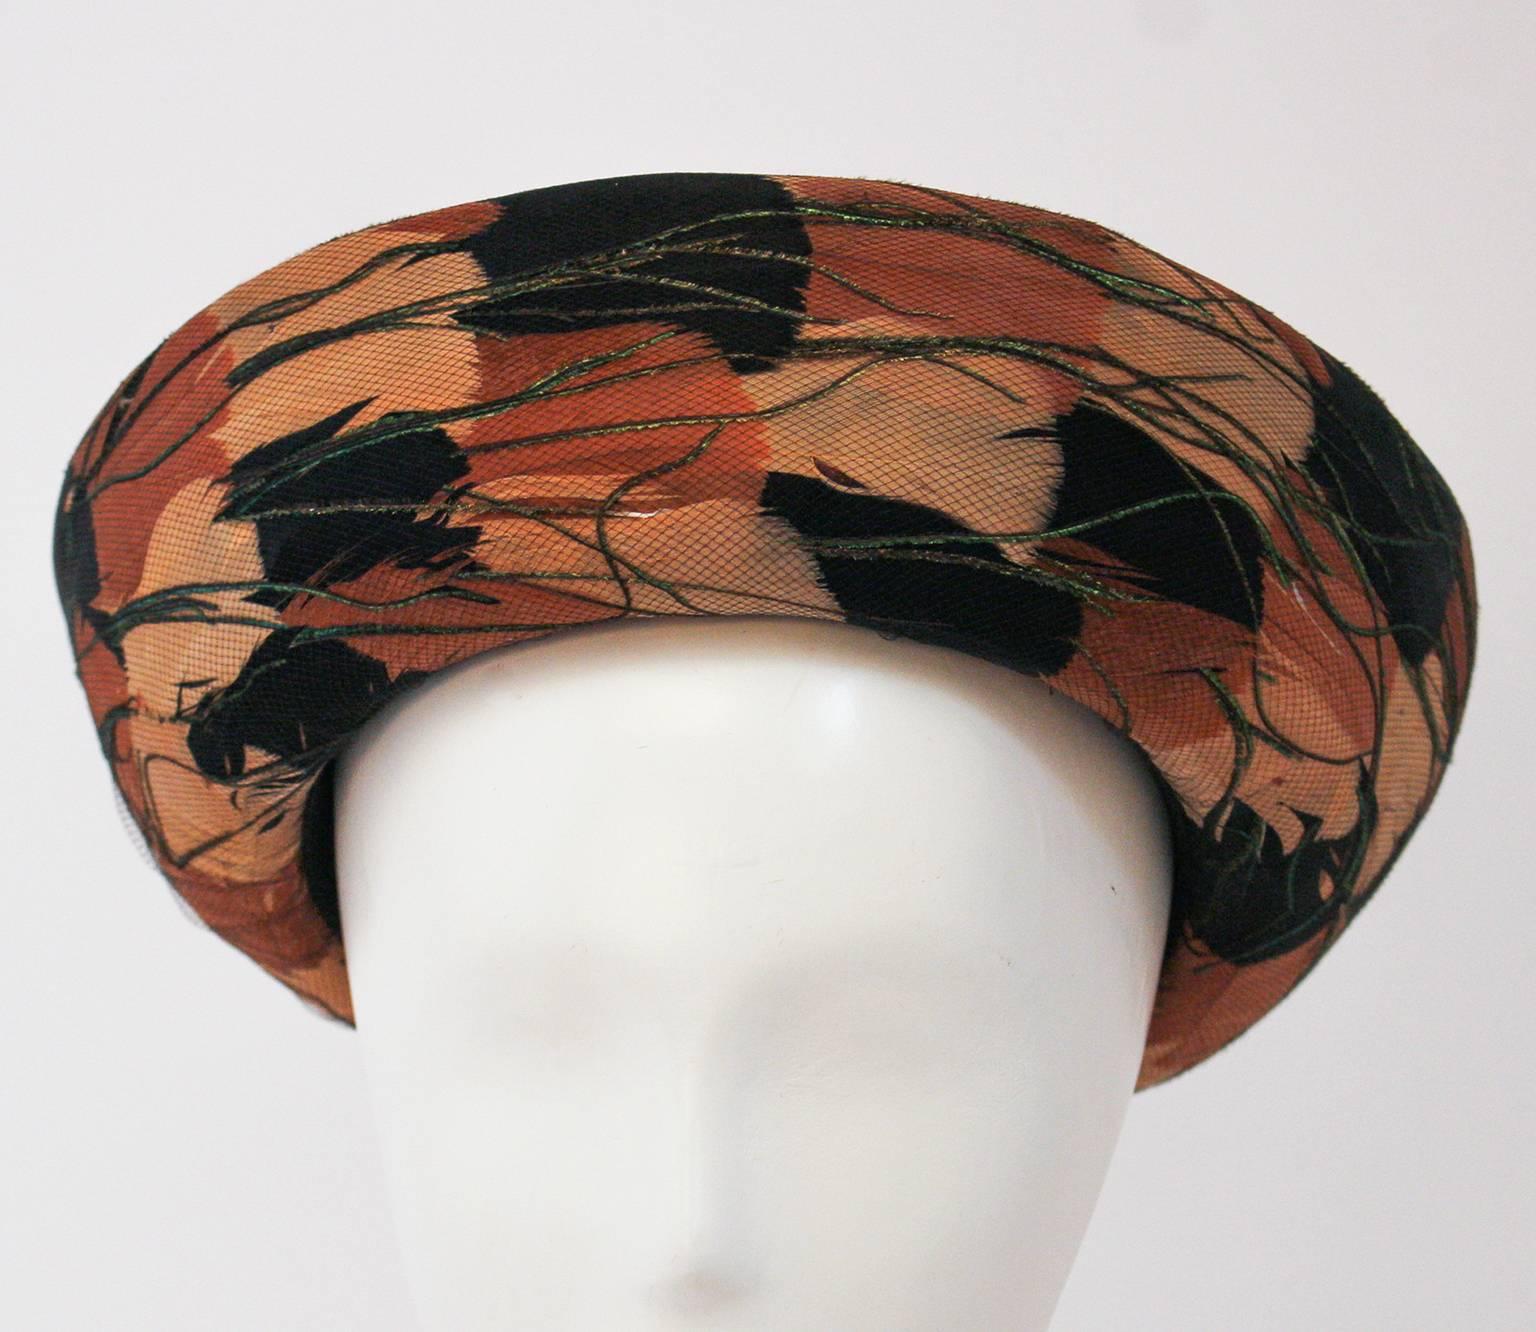 60s Orange and Black Feather Hat. Tulle overlay. Hand dyed feathers.